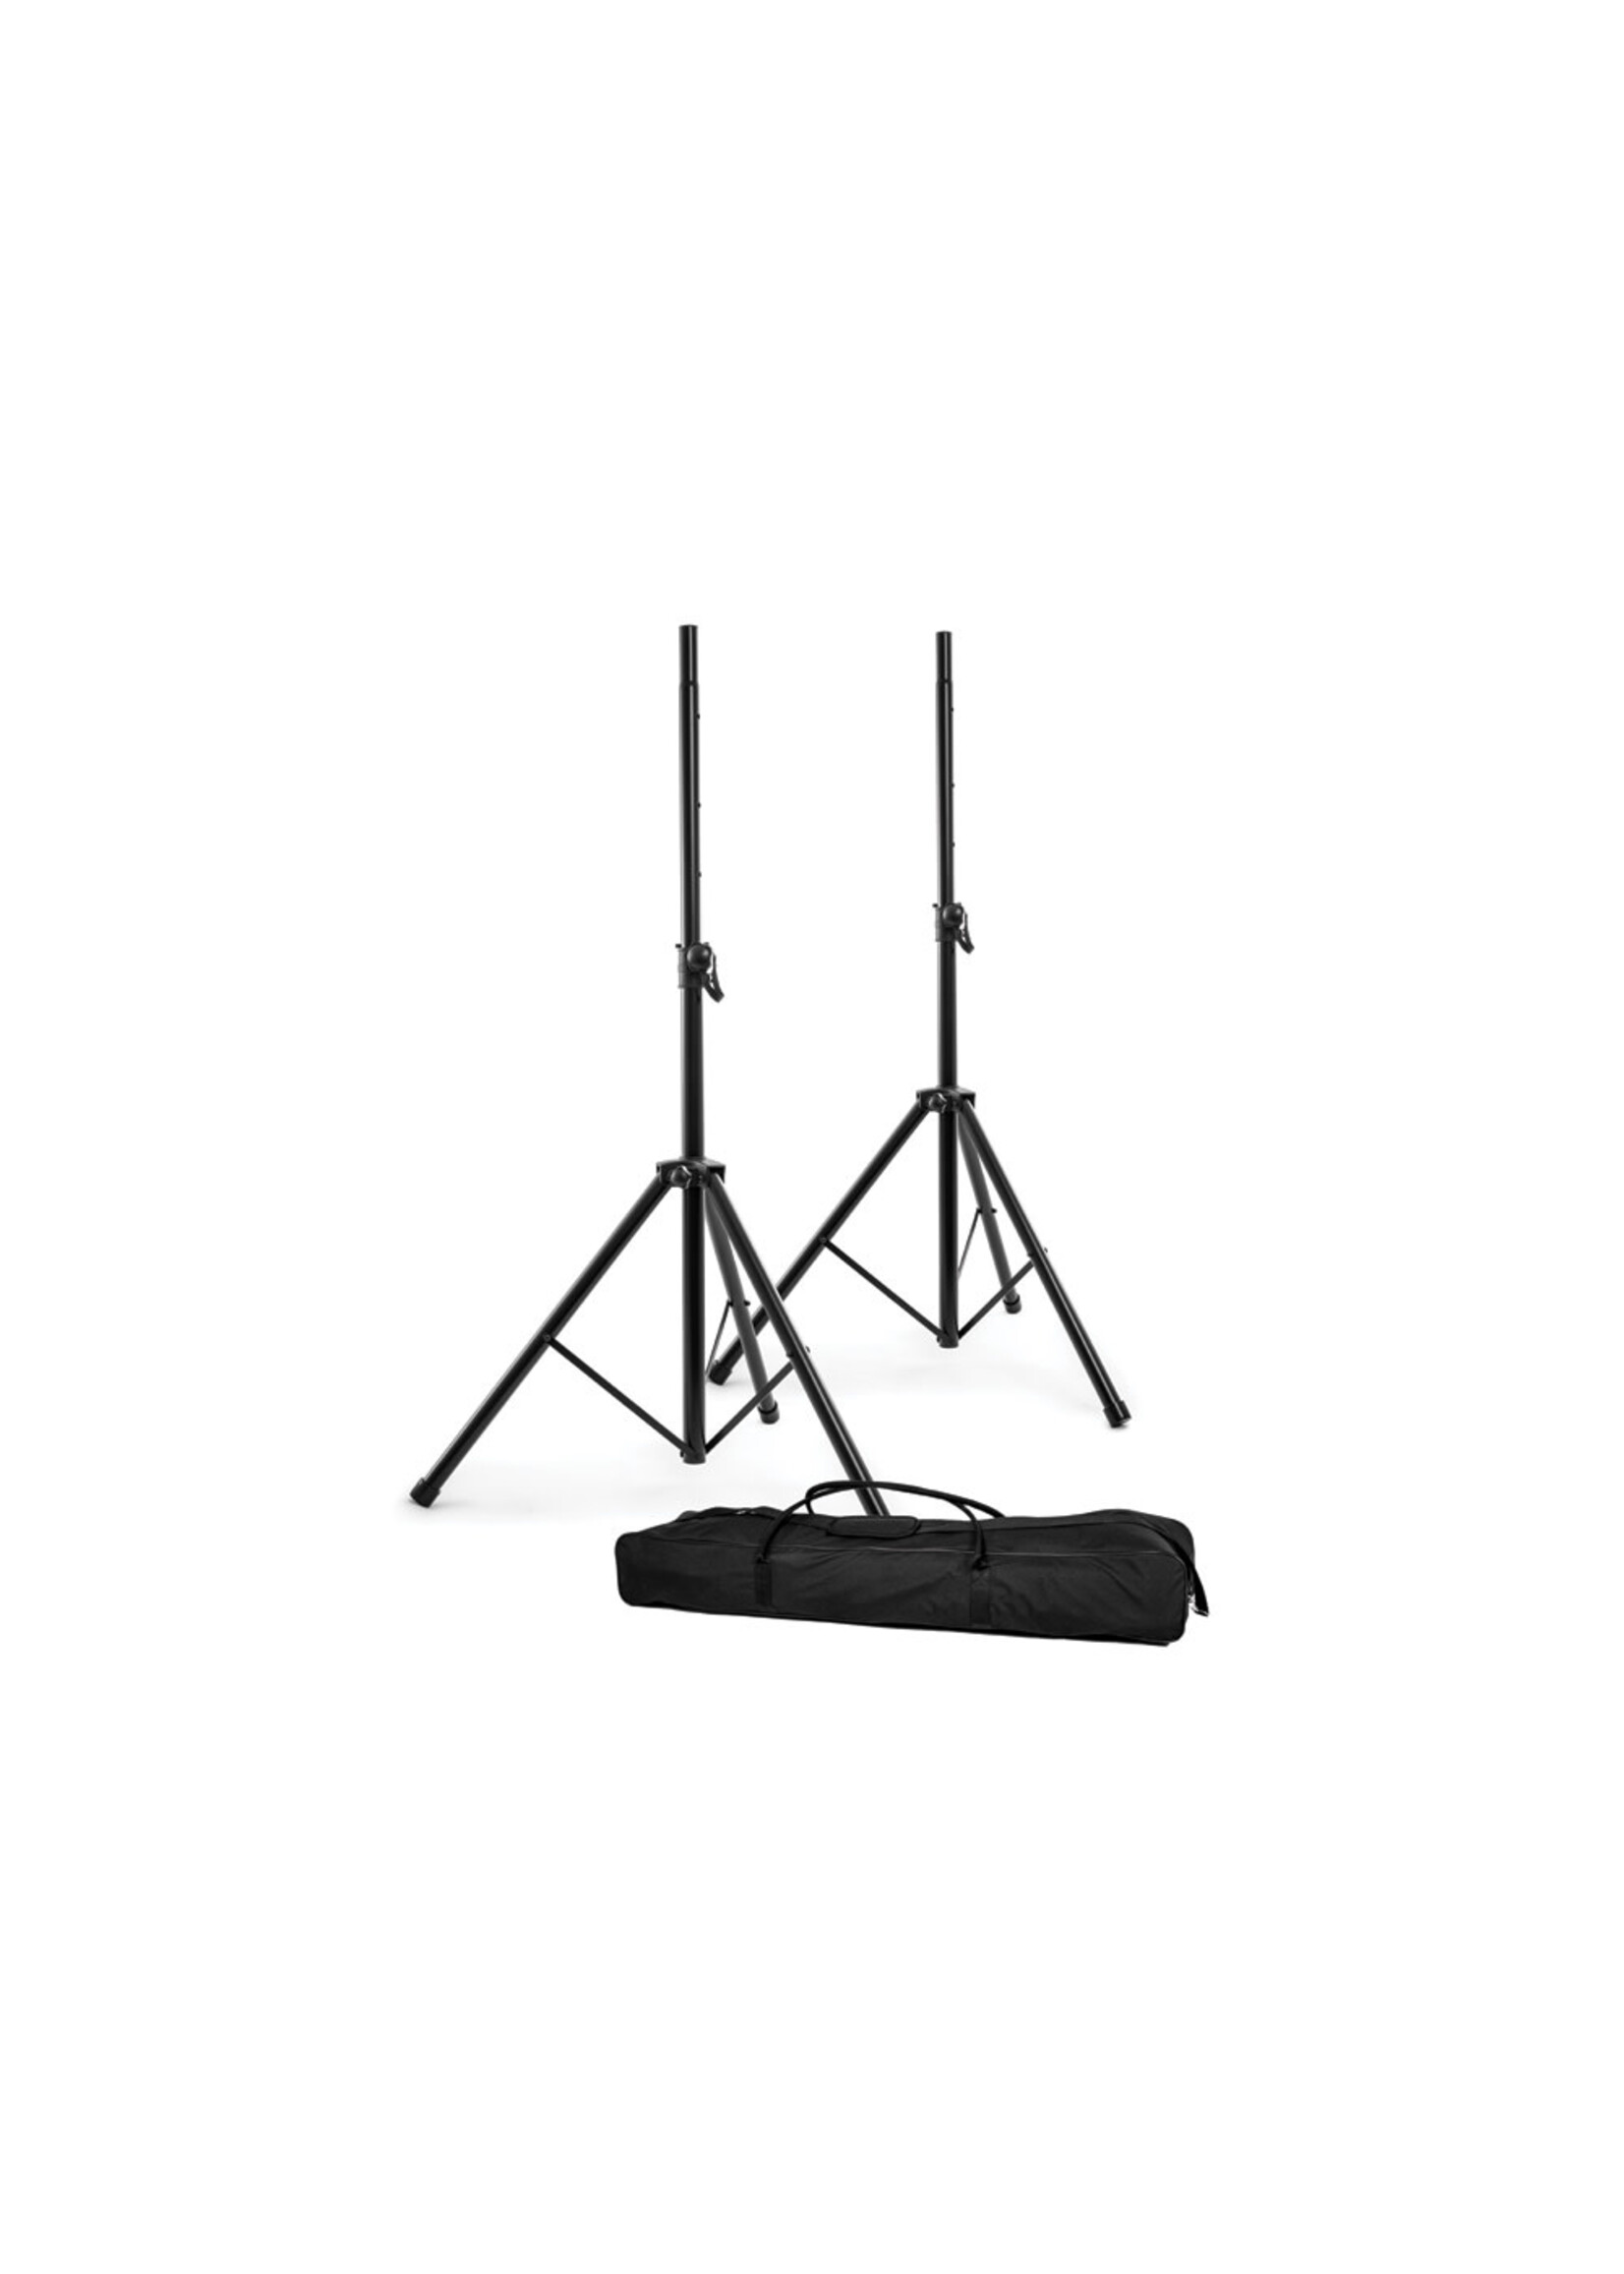 Nomad Nomad NSS-8033PK Heavy Duty Speaker Stand Pair with Gigbag